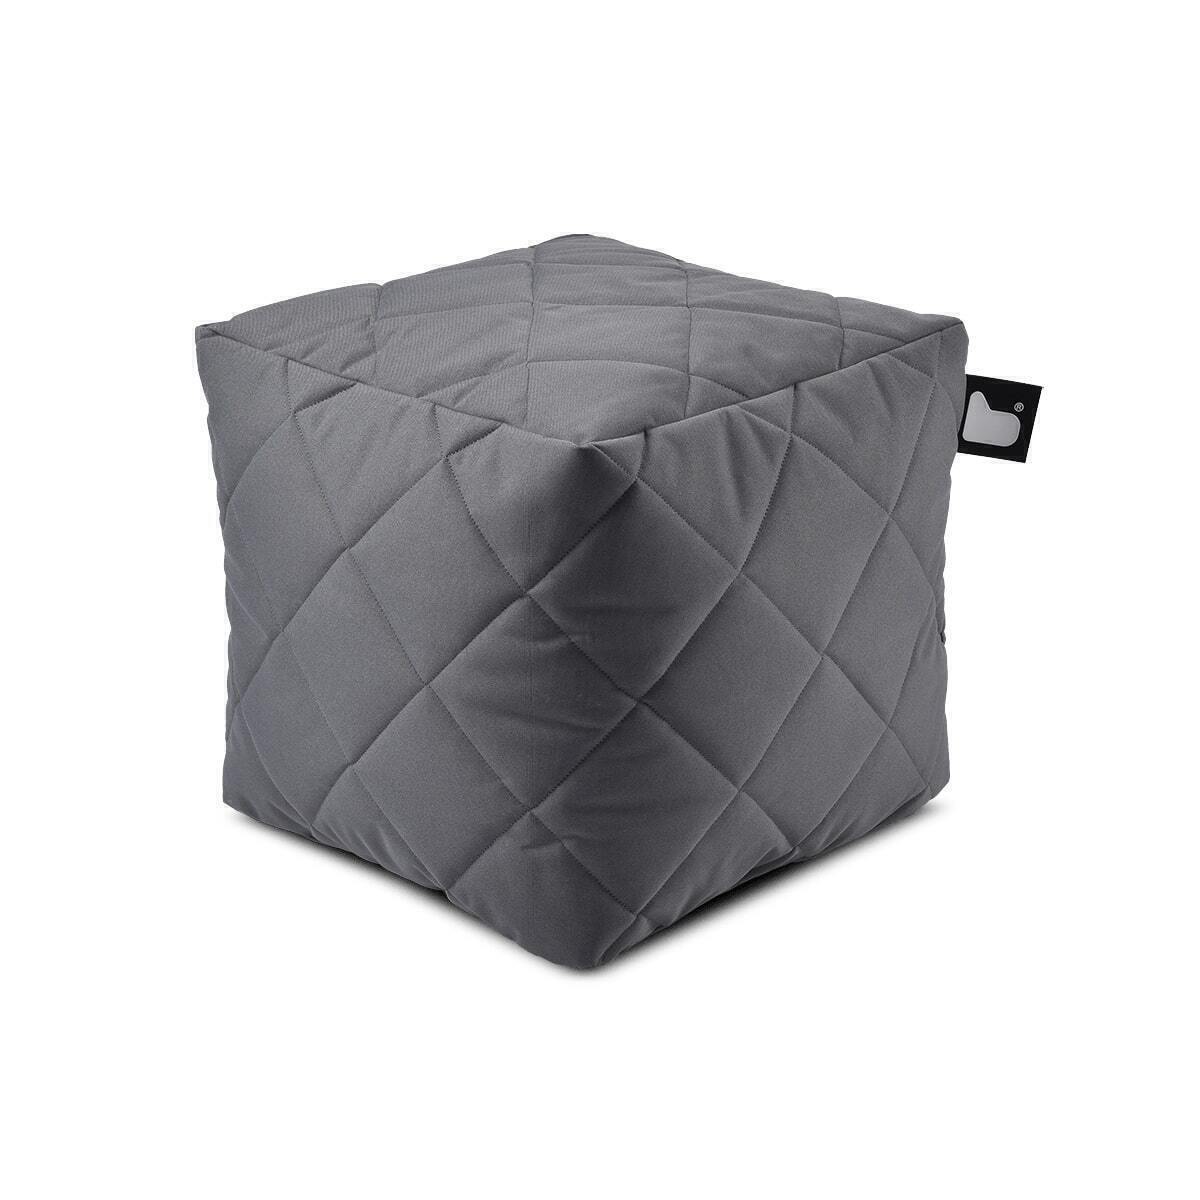 Extreme Lounging - Quilted Bean Box  - Grey product image